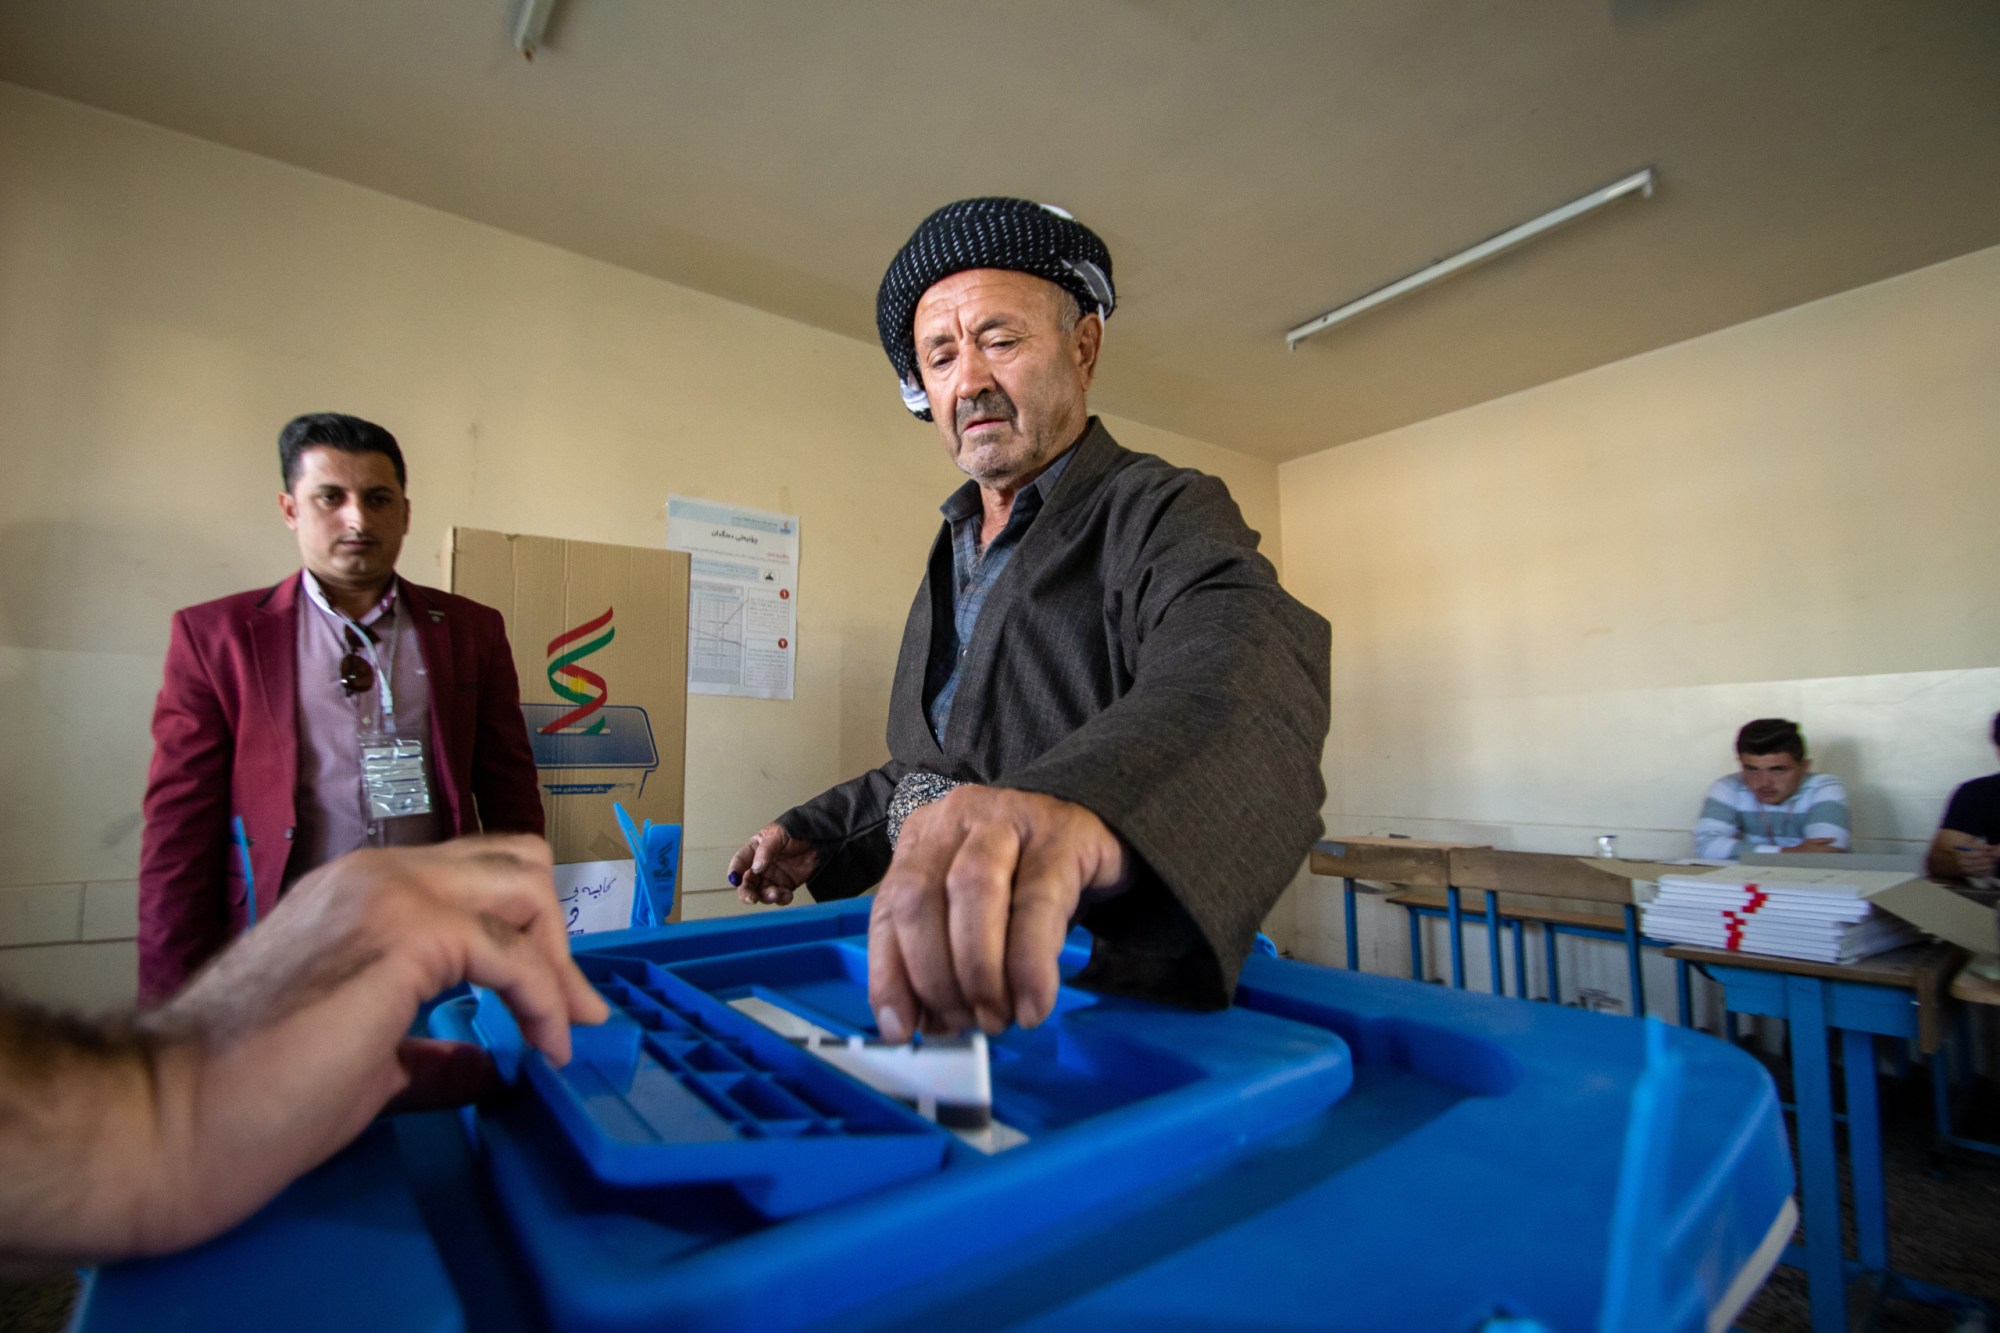 30 September 2018, Iraq, Sulaymaniyah: Omar Hamagharib Ahmad (72) voted for the parliamentary elections. One year after the controversial independence referendum of the Kurds in northern Iraq, parliamentary elections have begun in the autonomy region. More than 3.8 million voters are called upon to elect the 111 members of the regional parliament in the city of Erbil from more than 750 candidates. Photo: Tobias Schreiner/dpa (Photo by Tobias Schreiner/picture alliance via Getty Images)